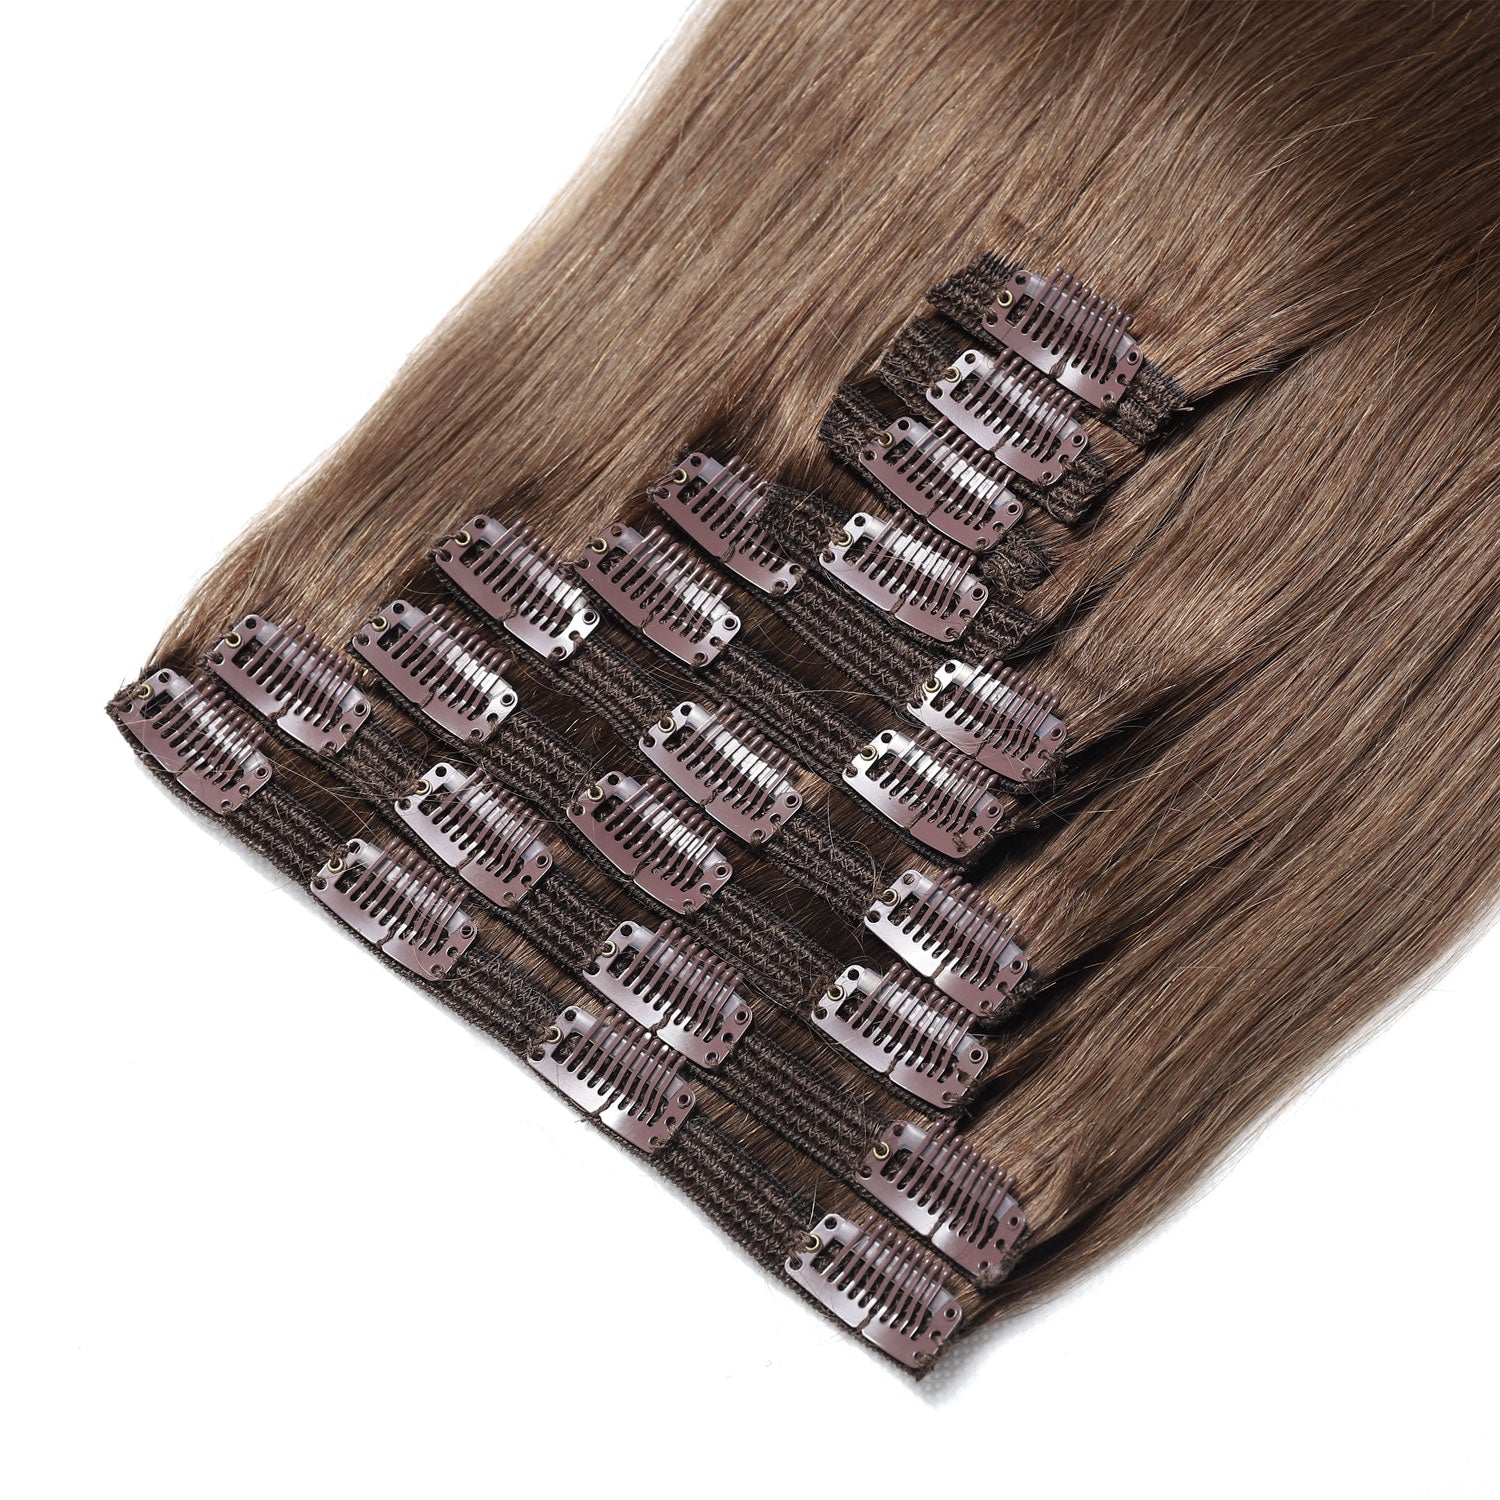 End of the day removal of clip-in hair extensions, ensuring they remain in top condition. Follow these steps to safely and effectively remove your 26 inch extensions, prolonging their lifespan.